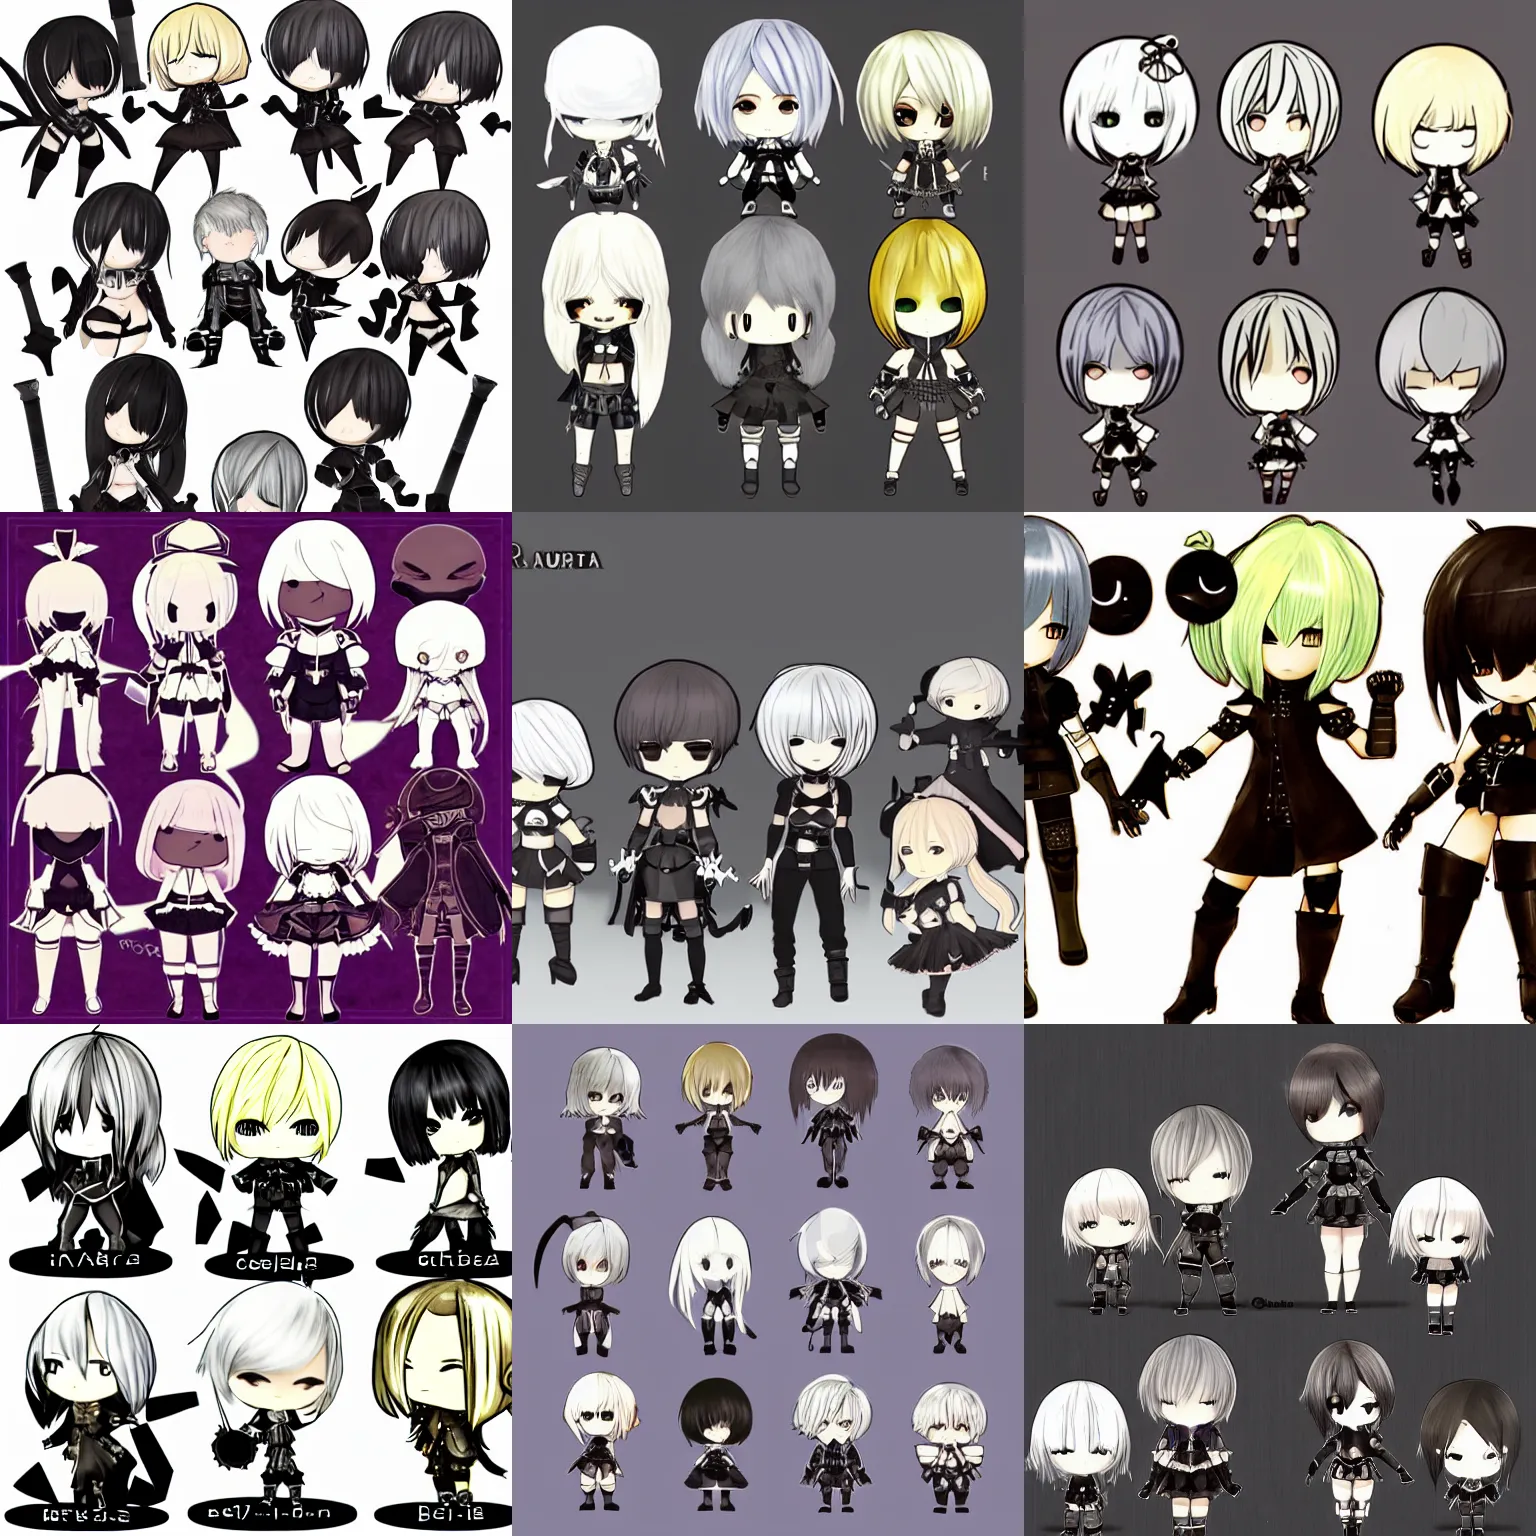 Prompt: Nier Automata chibi characters